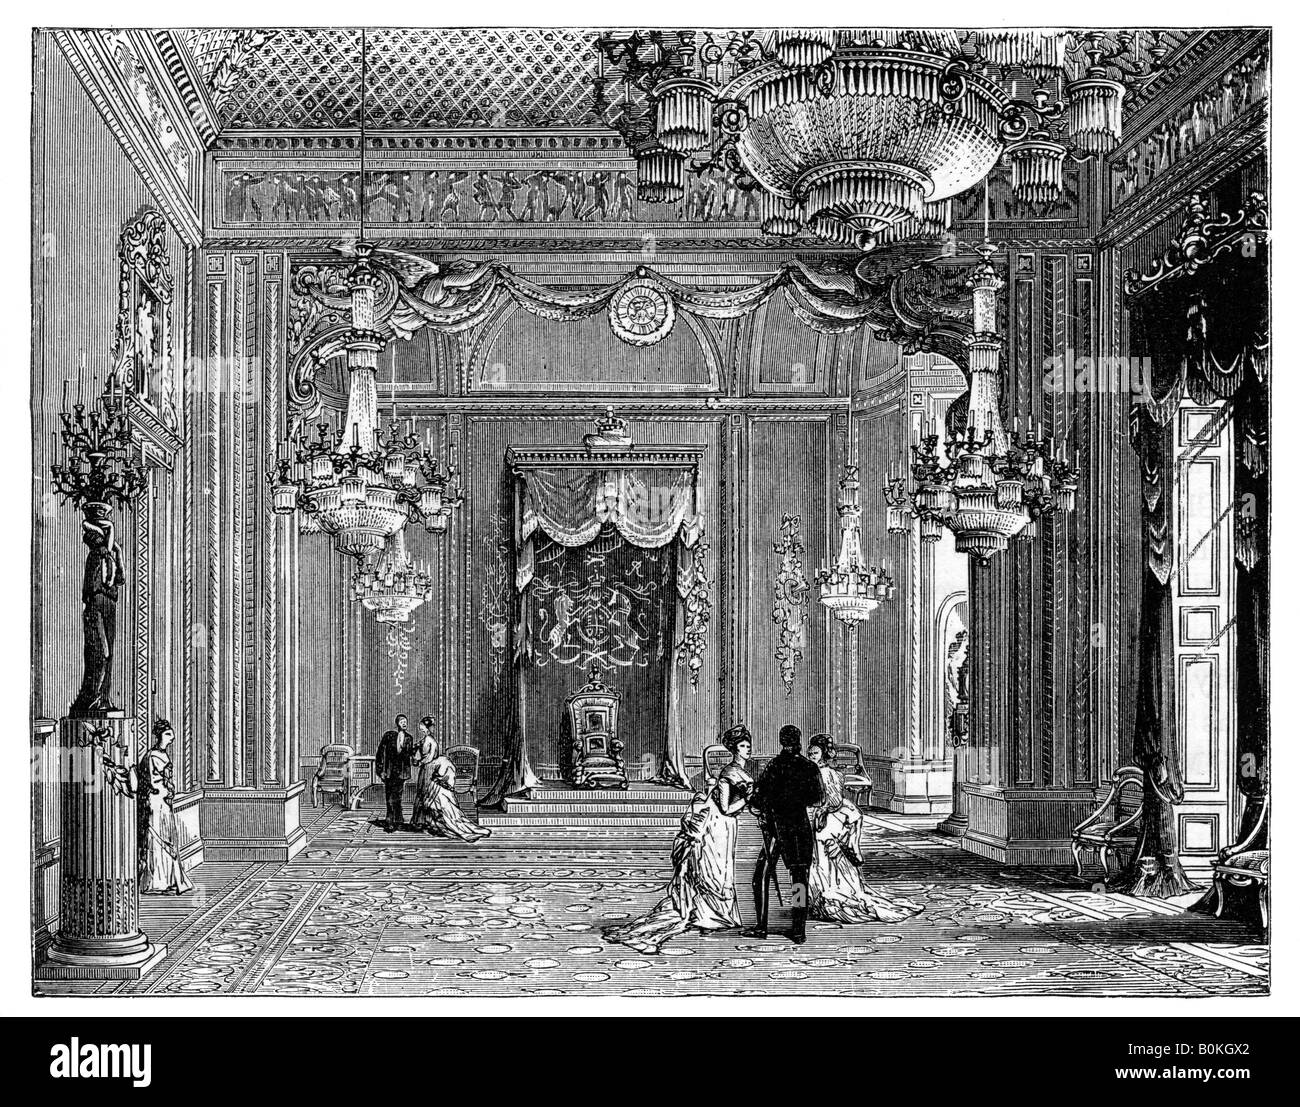 The Throne Room, Buckingham Palace, 1900. Artist: Unknown Stock Photo ...